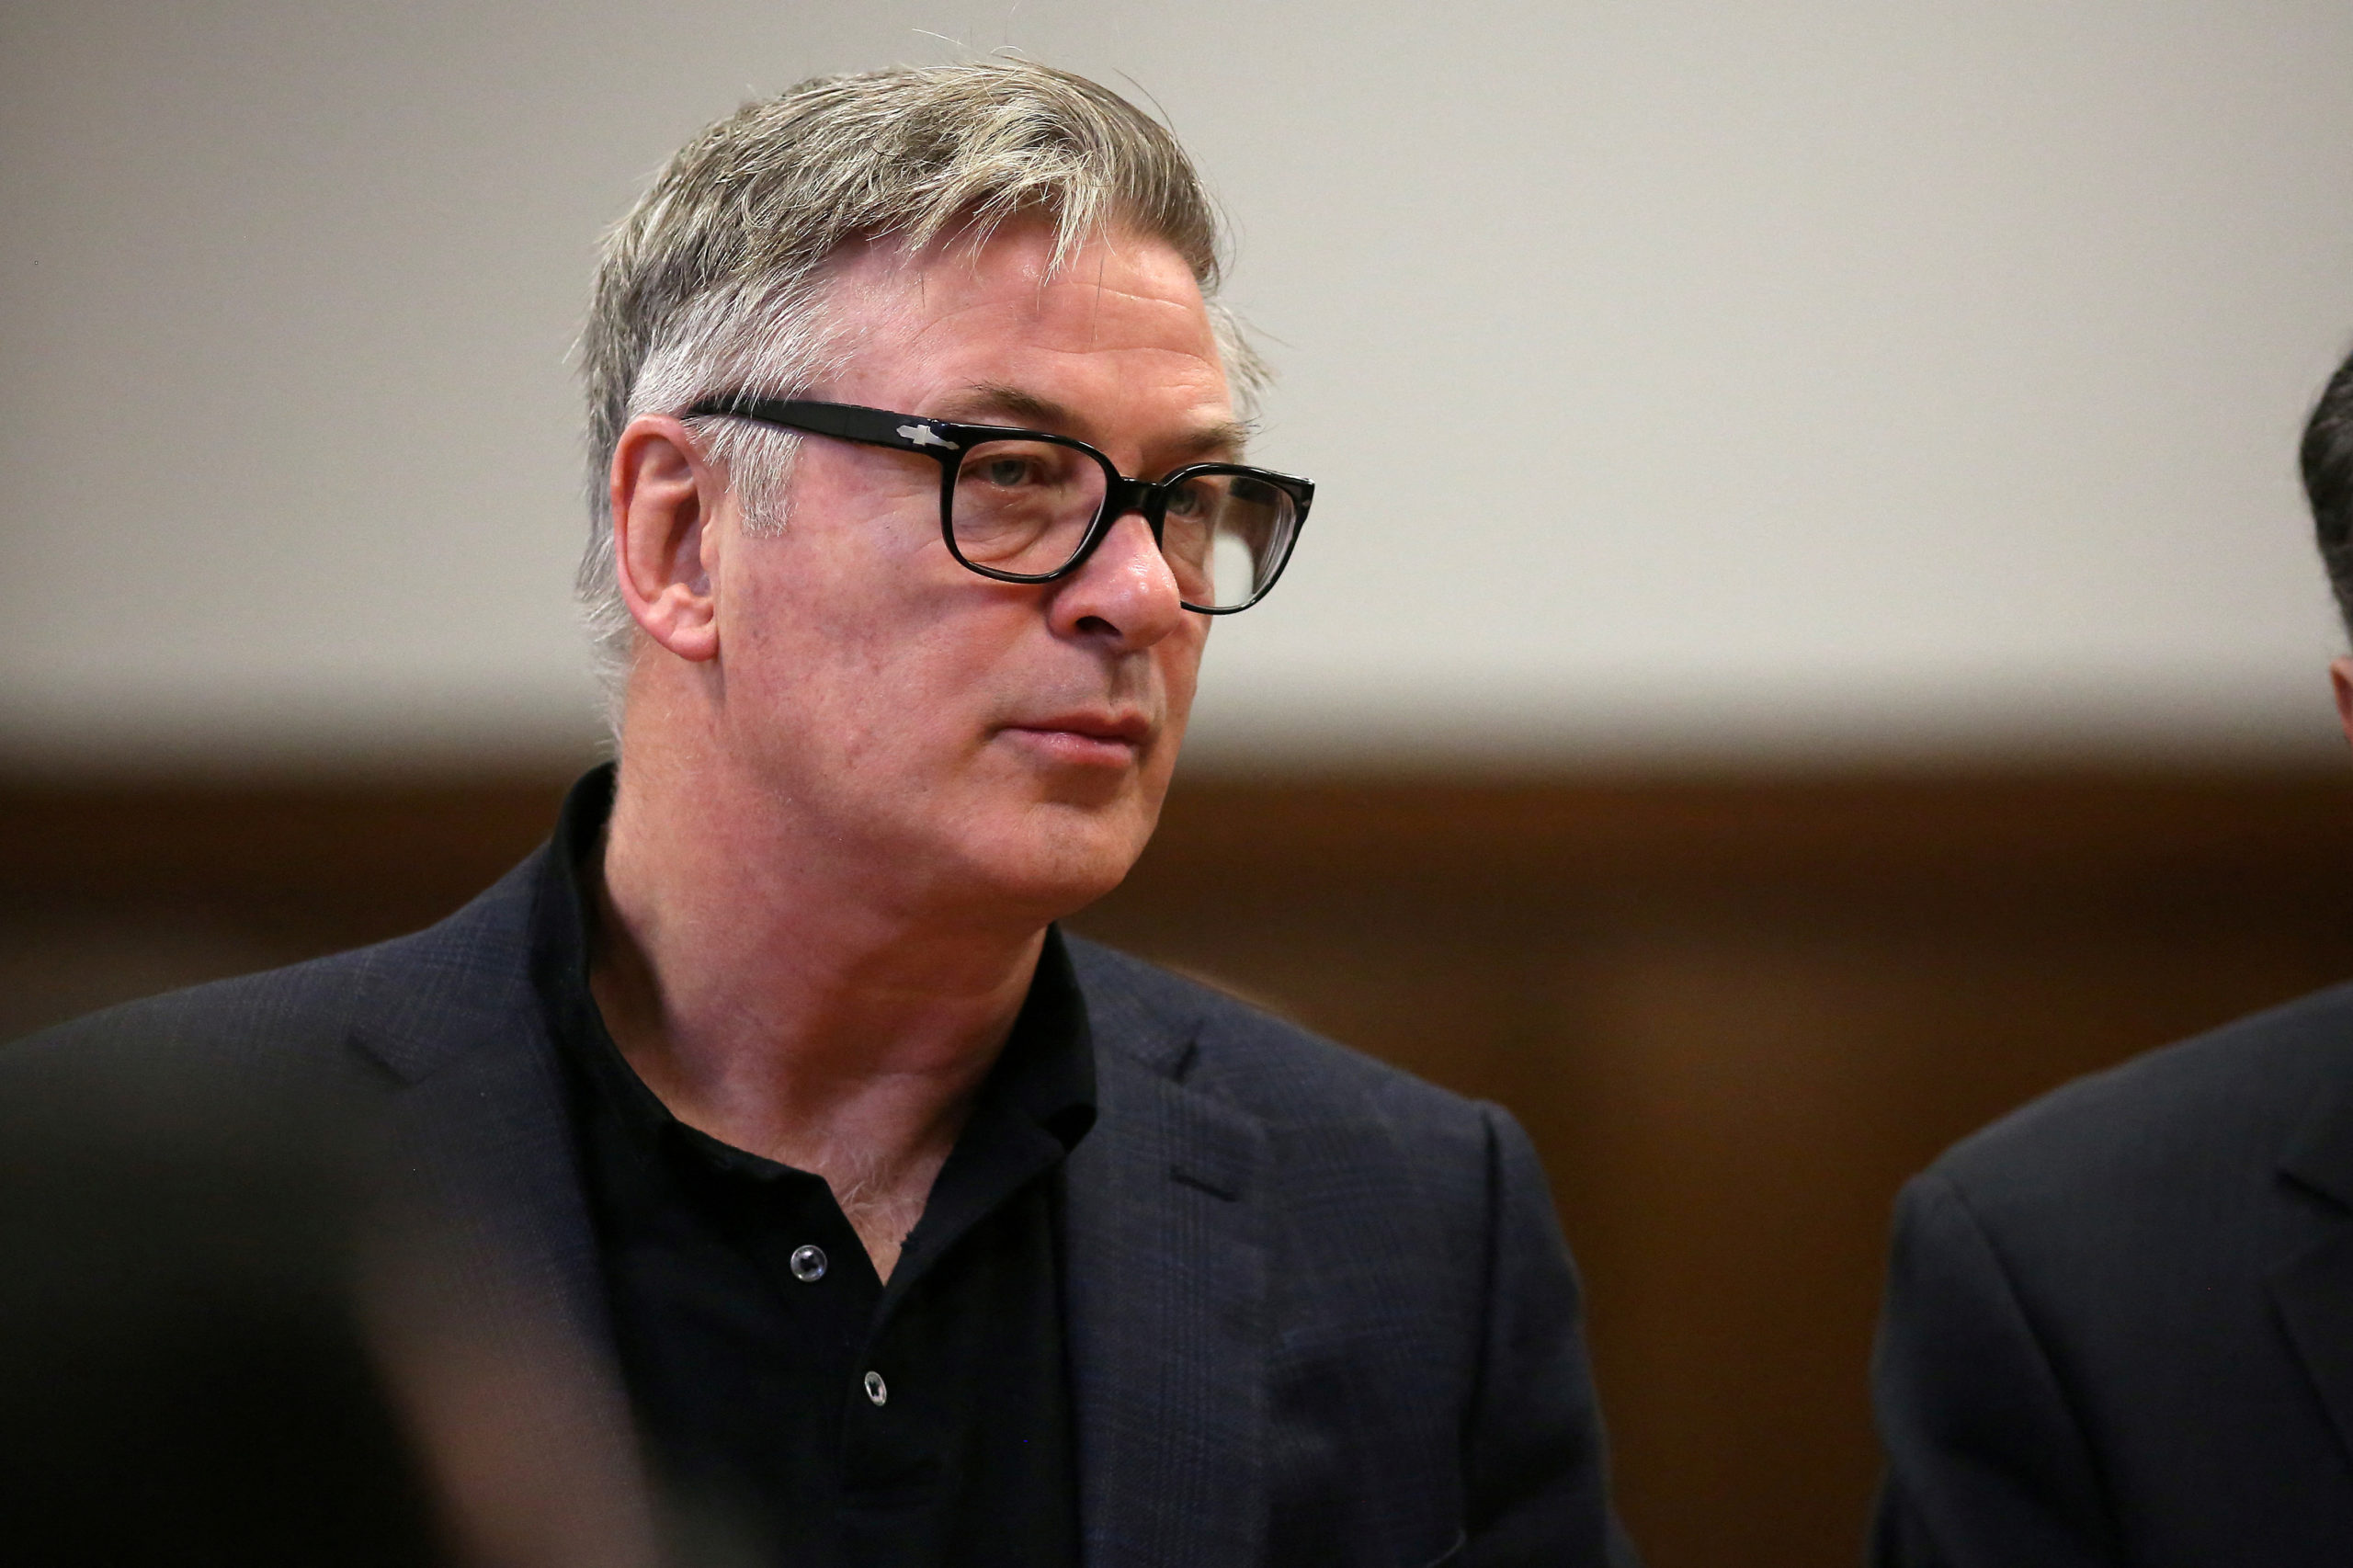 Actor Alec Baldwin appears in court in the Manhattan borough of New York City, New York, U.S., January 23, 2019. Alex Tabak/Pool via REUTERS/File Photo